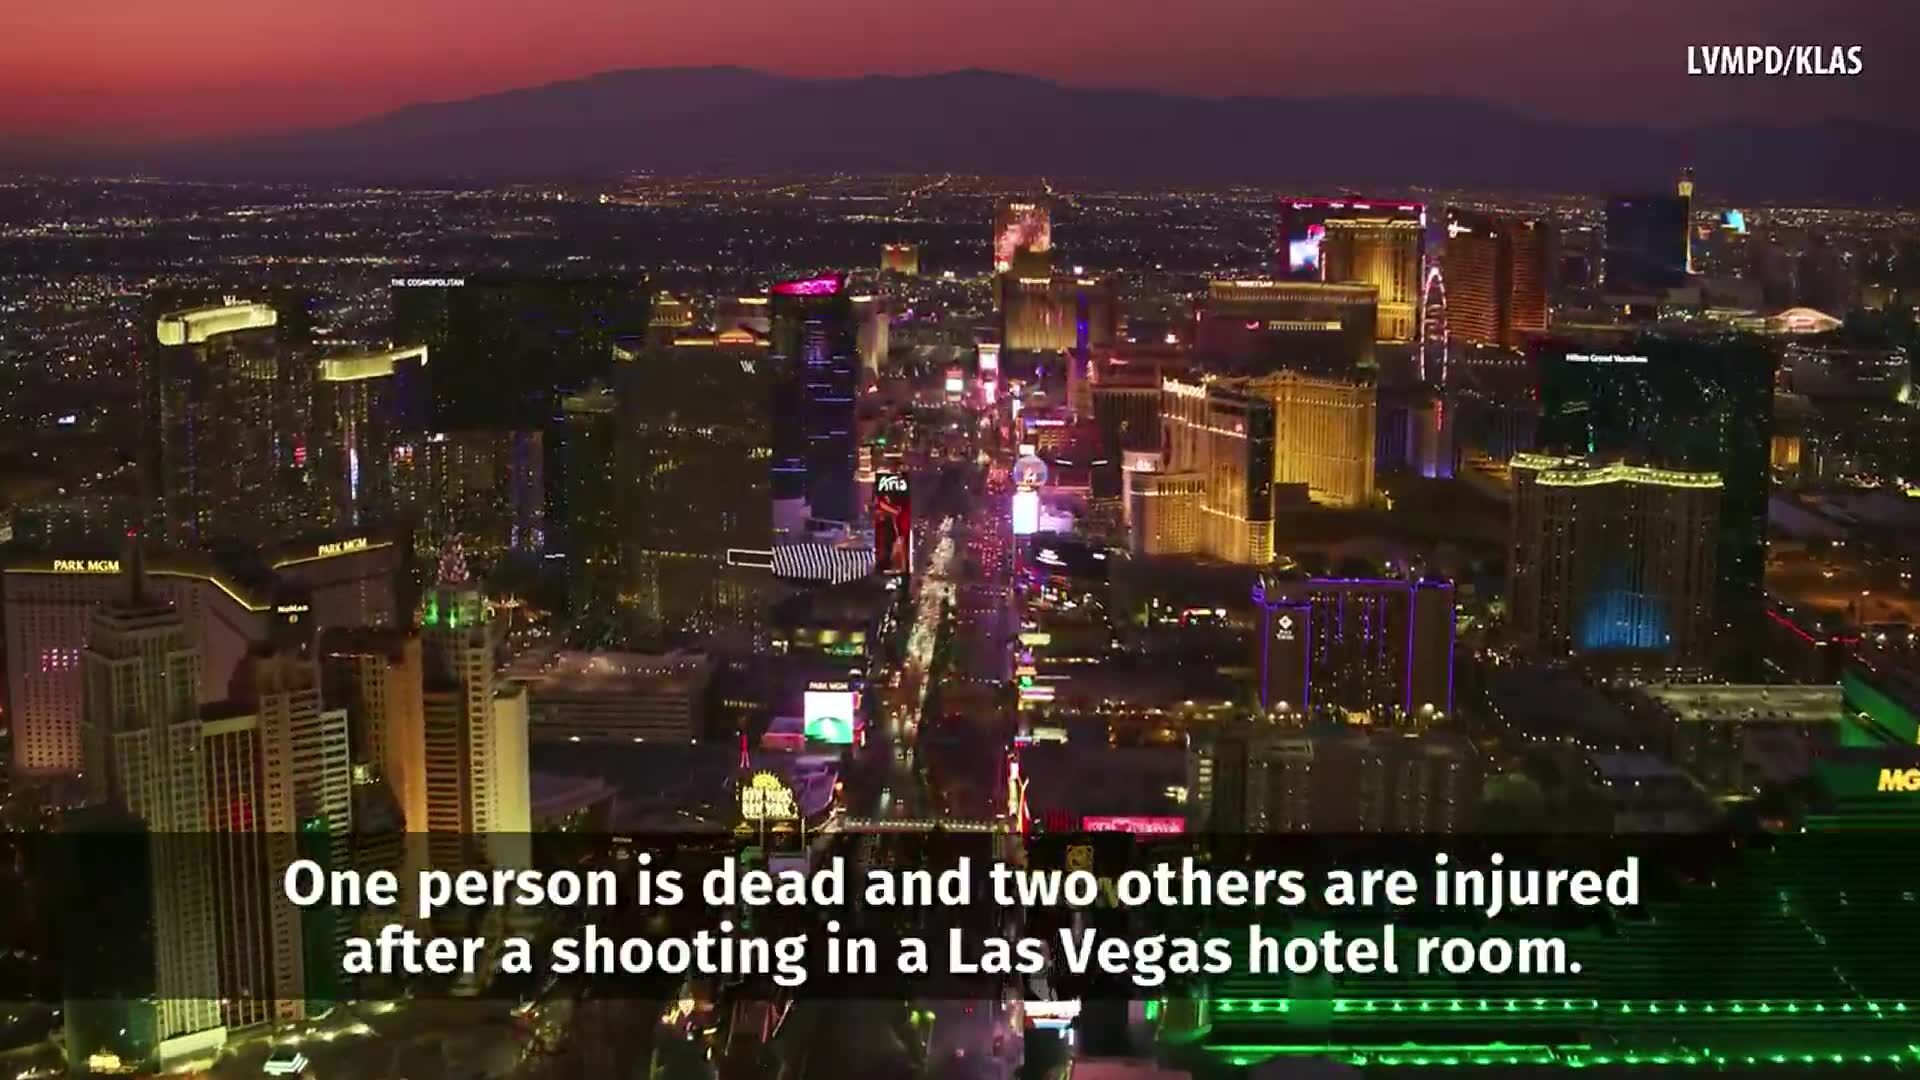 Police 1 dead, 2 others injured after shooting in hotel room in the Mirage on the Las Vegas Strip Trending fox13memphis